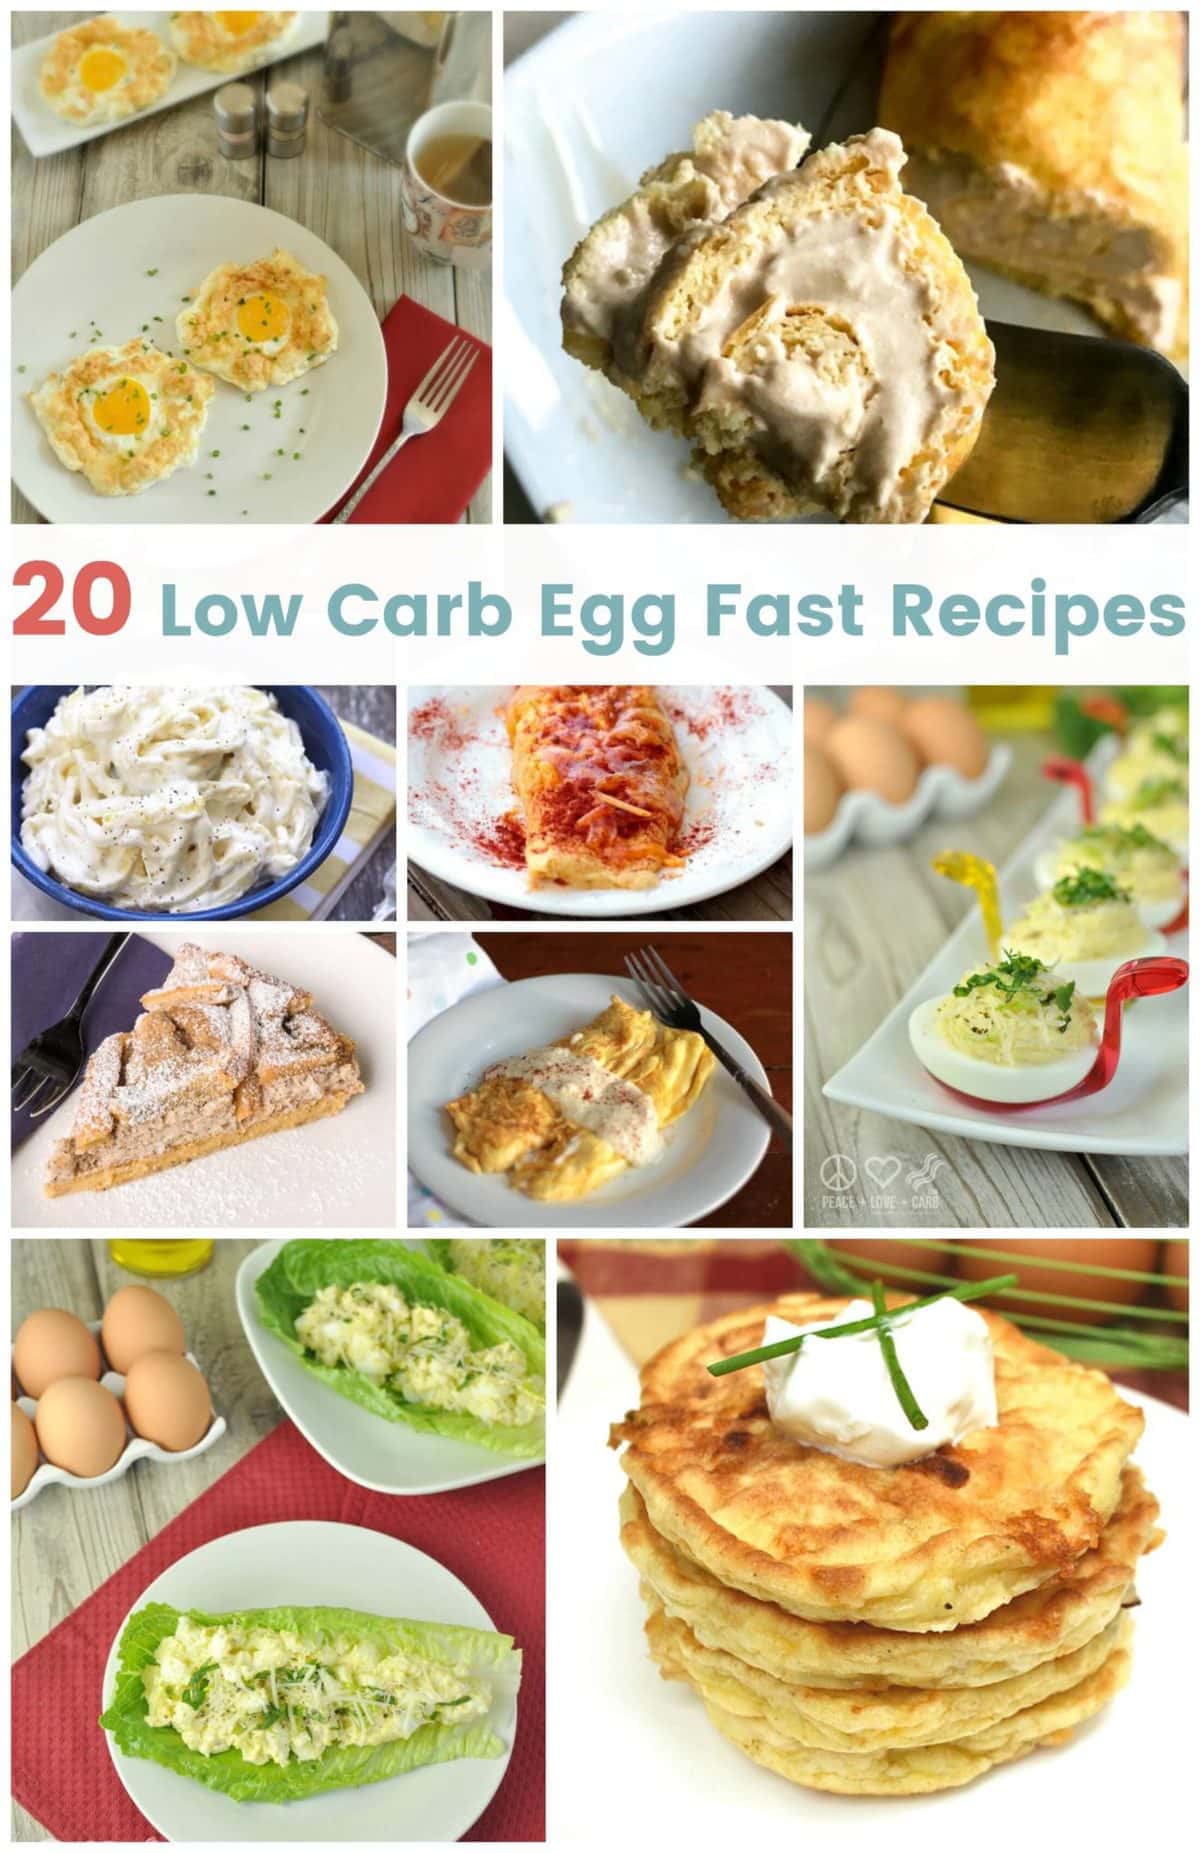 20 Egg Fast Recipes | Peace Love and Low Carb